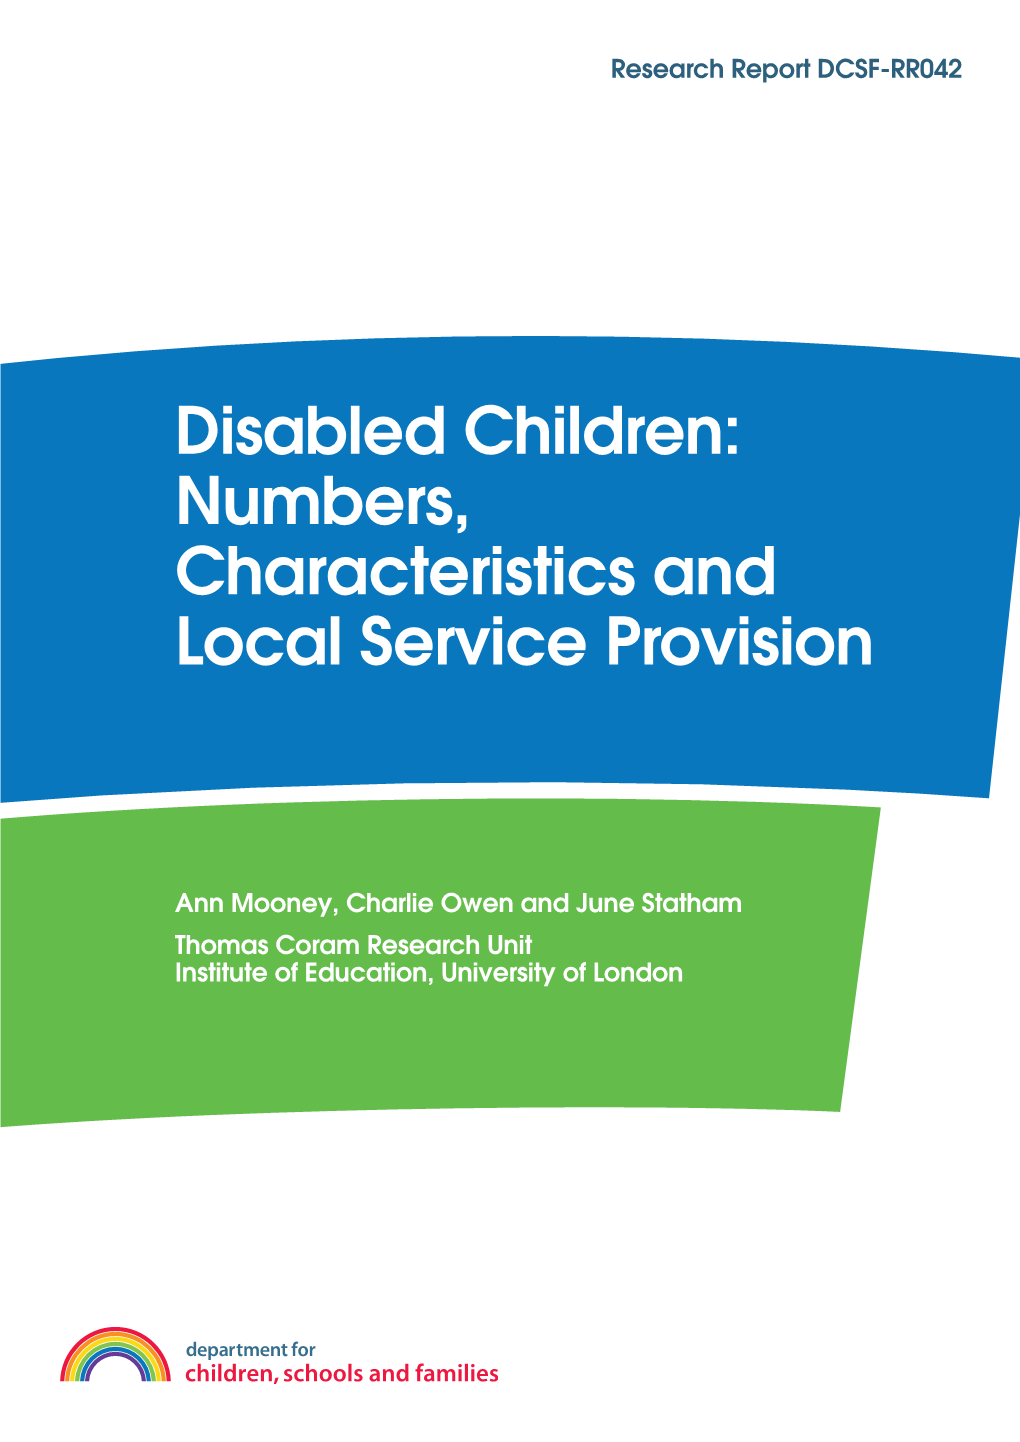 Disabled Children: Numbers, Characteristics and Local Service Provision